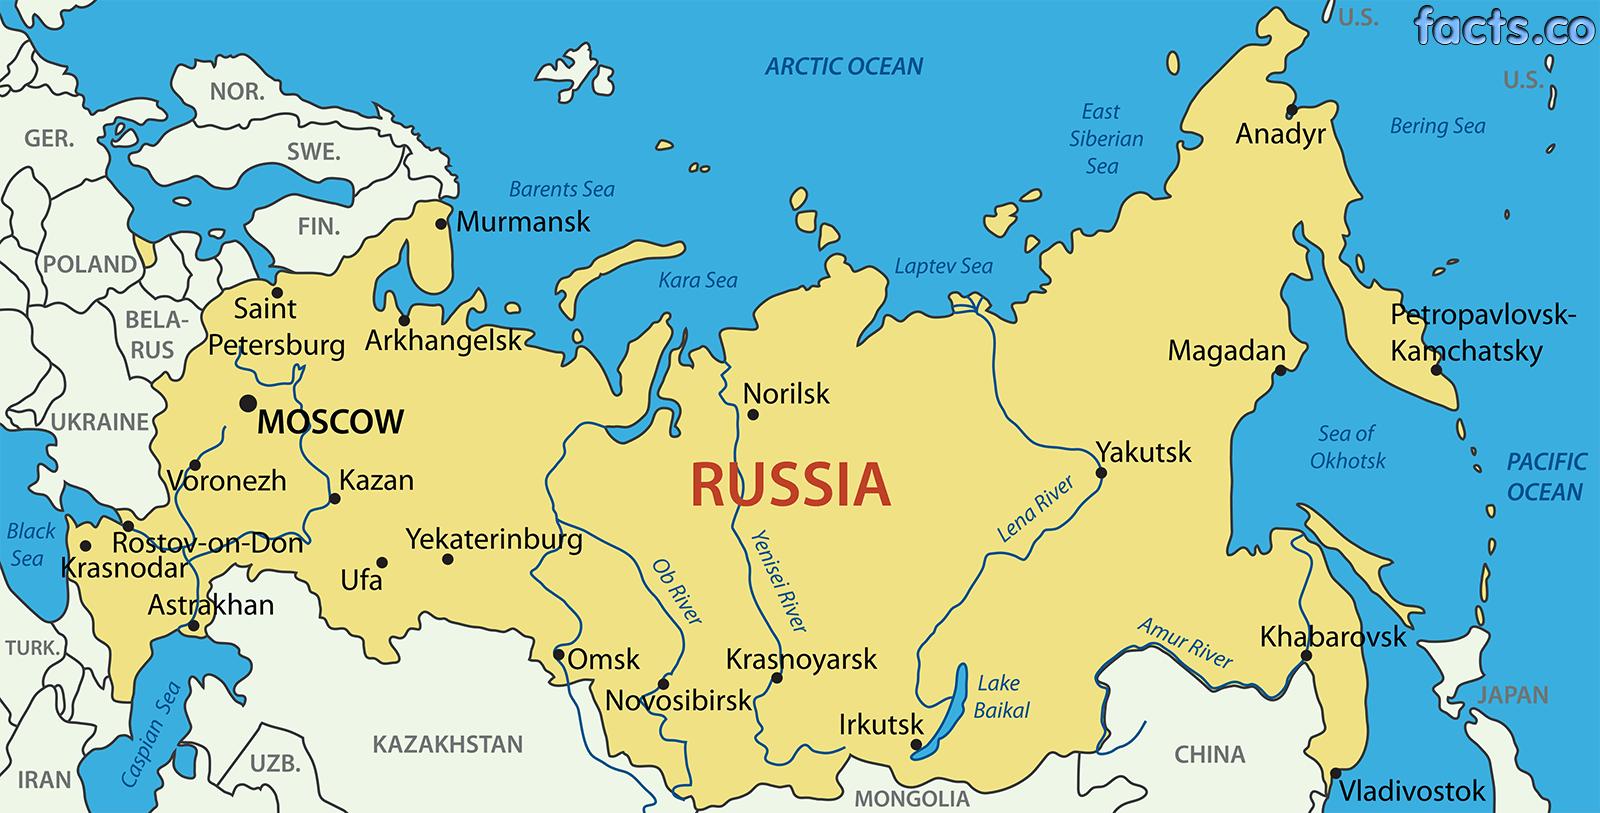 what is the only global city in the region of russia and its neighboring countries